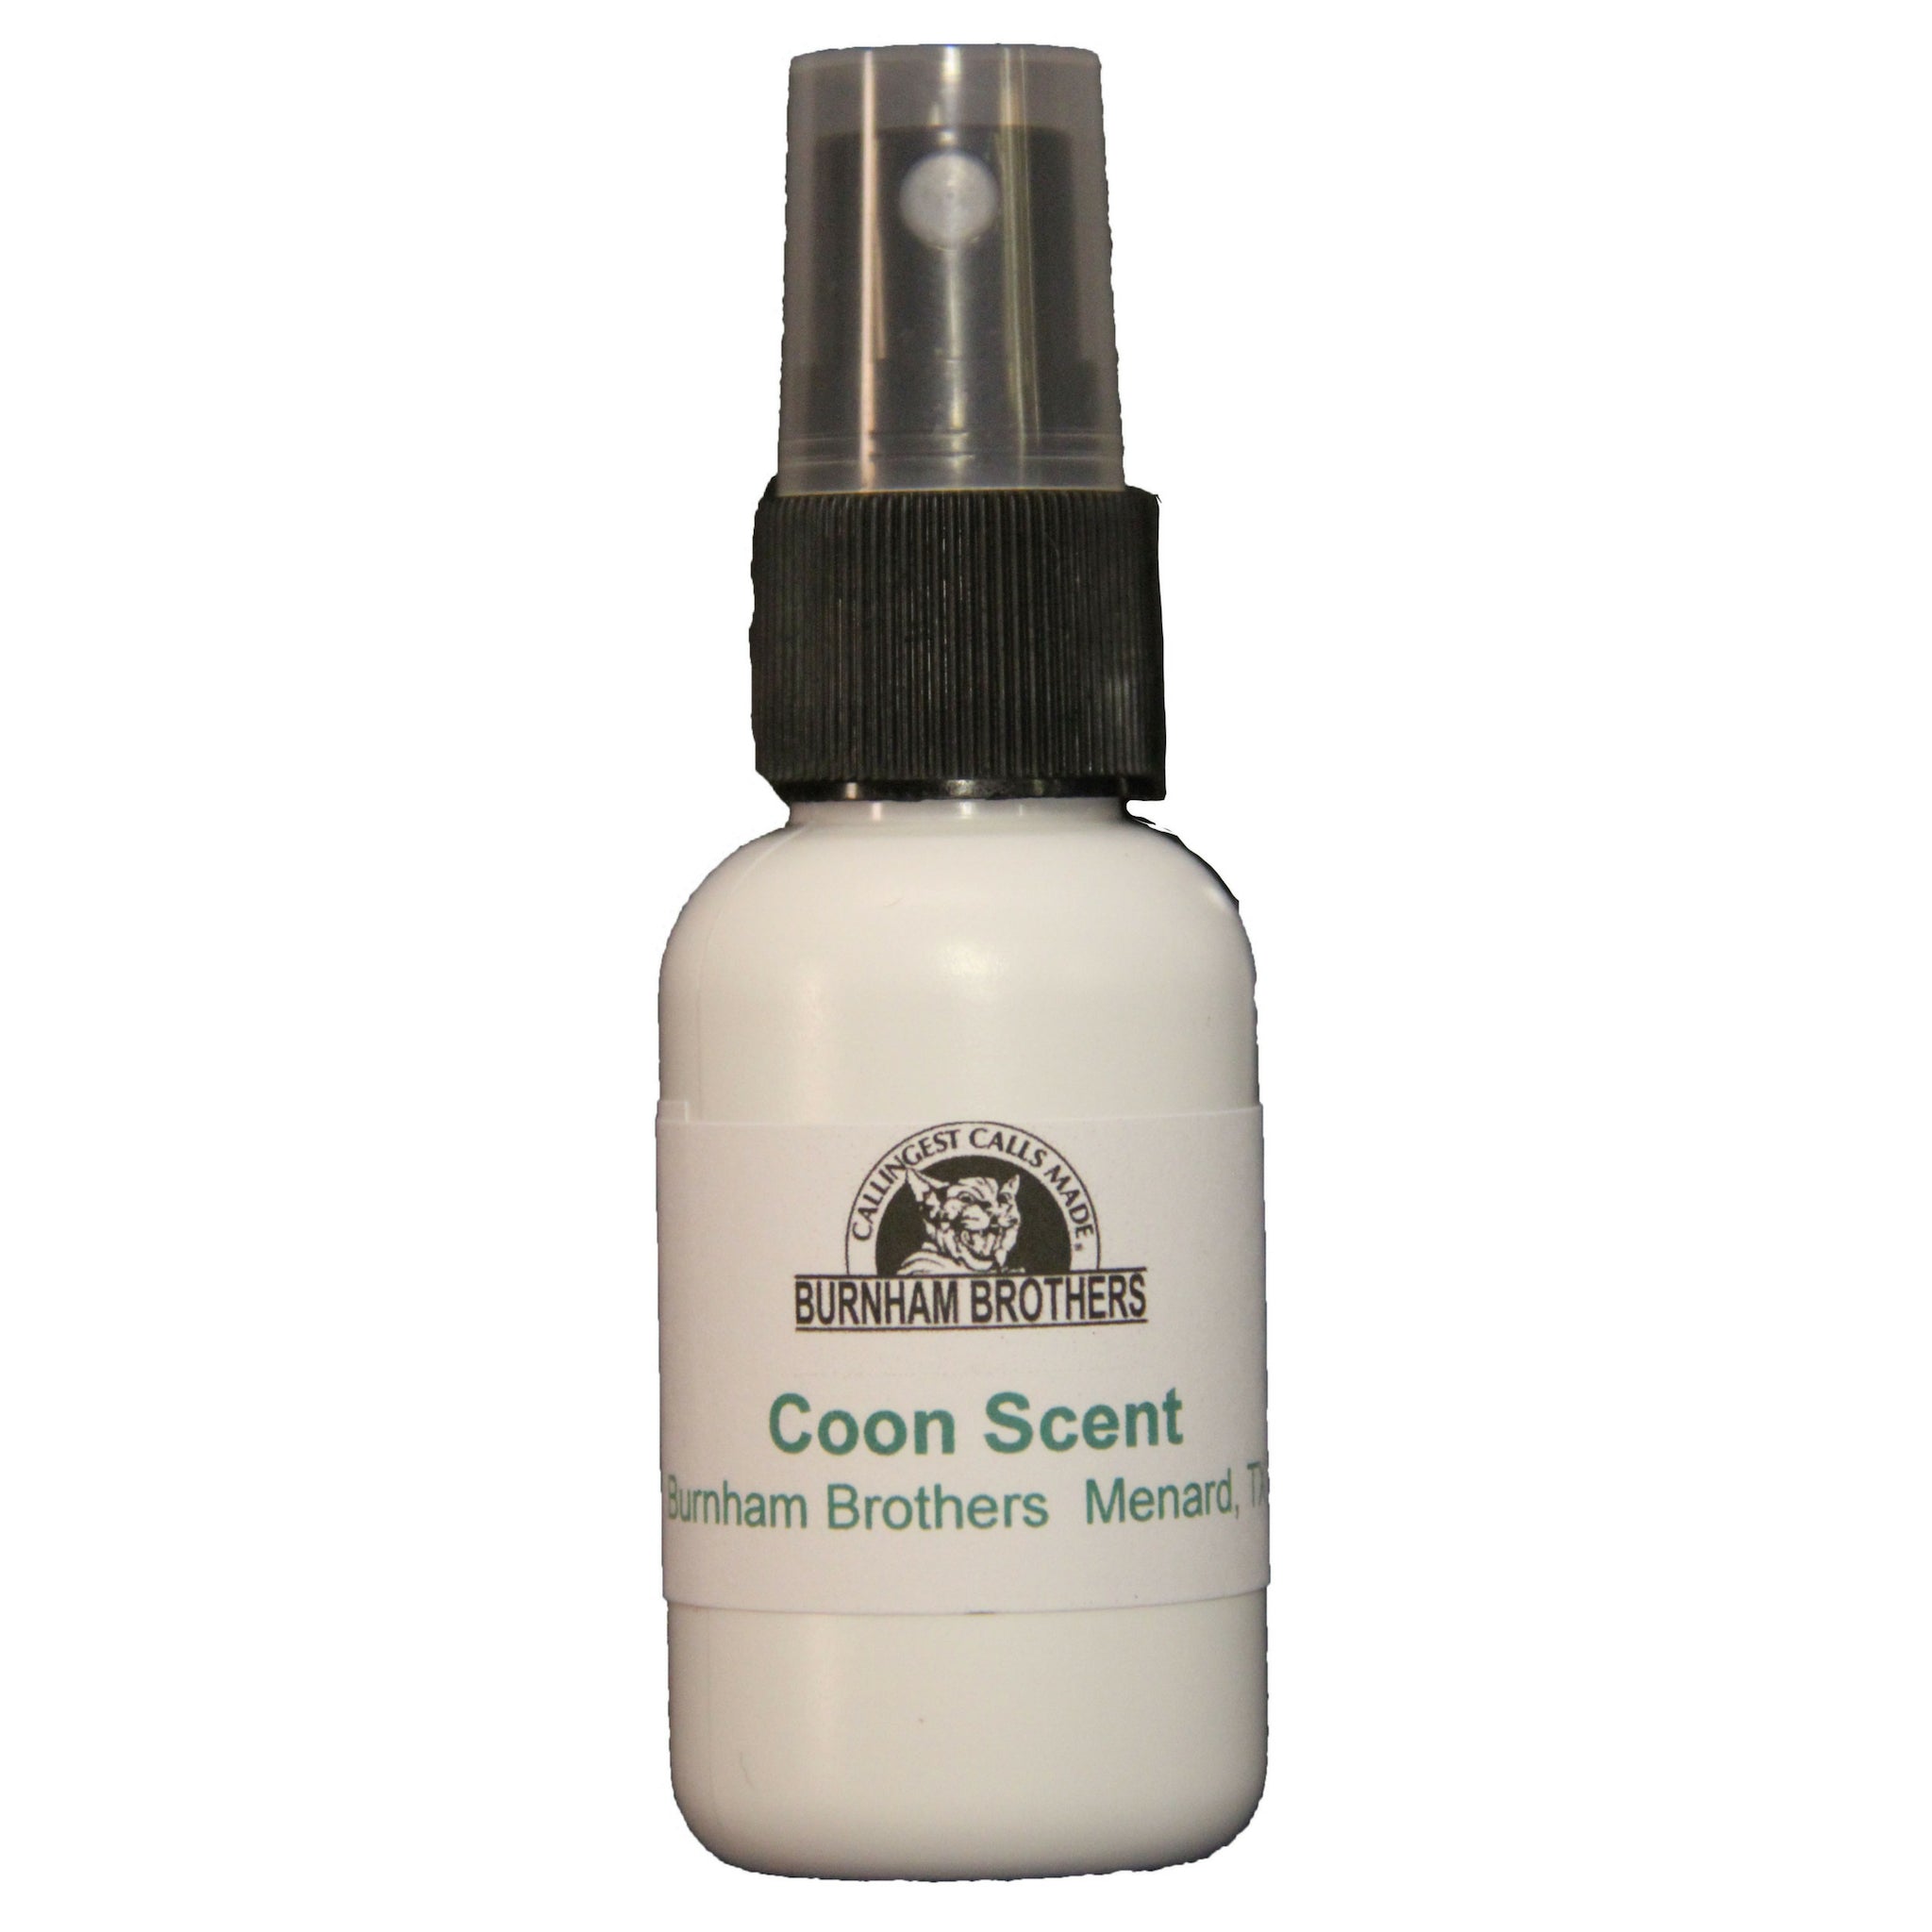 Coon Scent by Burnham Brothers